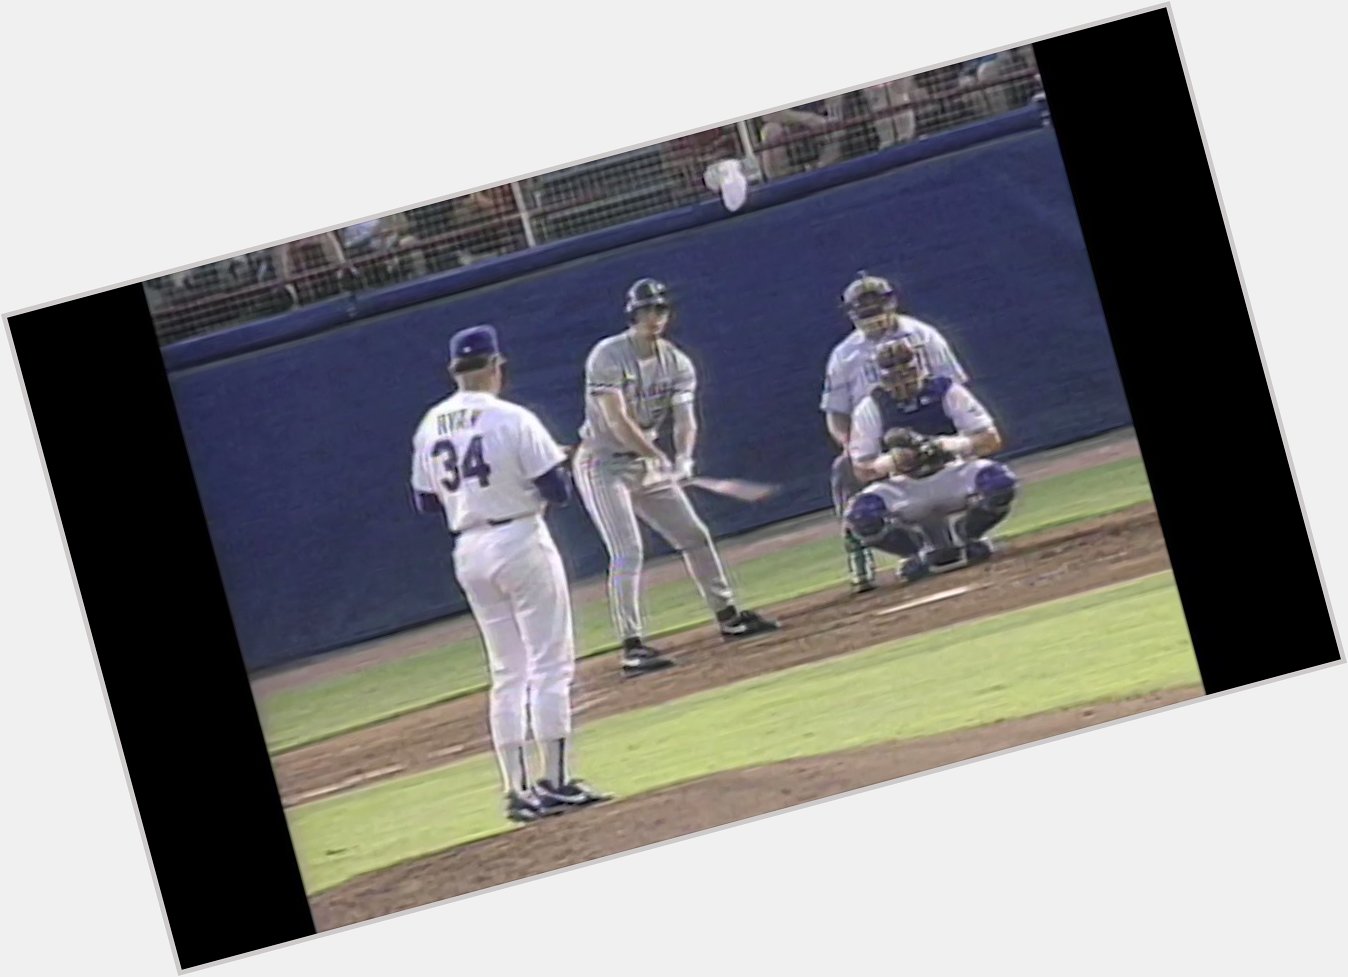 Happy Birthday to an absolute LEGEND. One of my favorite baseball moments ever.

Here\s to you, Mr. Nolan Ryan.   